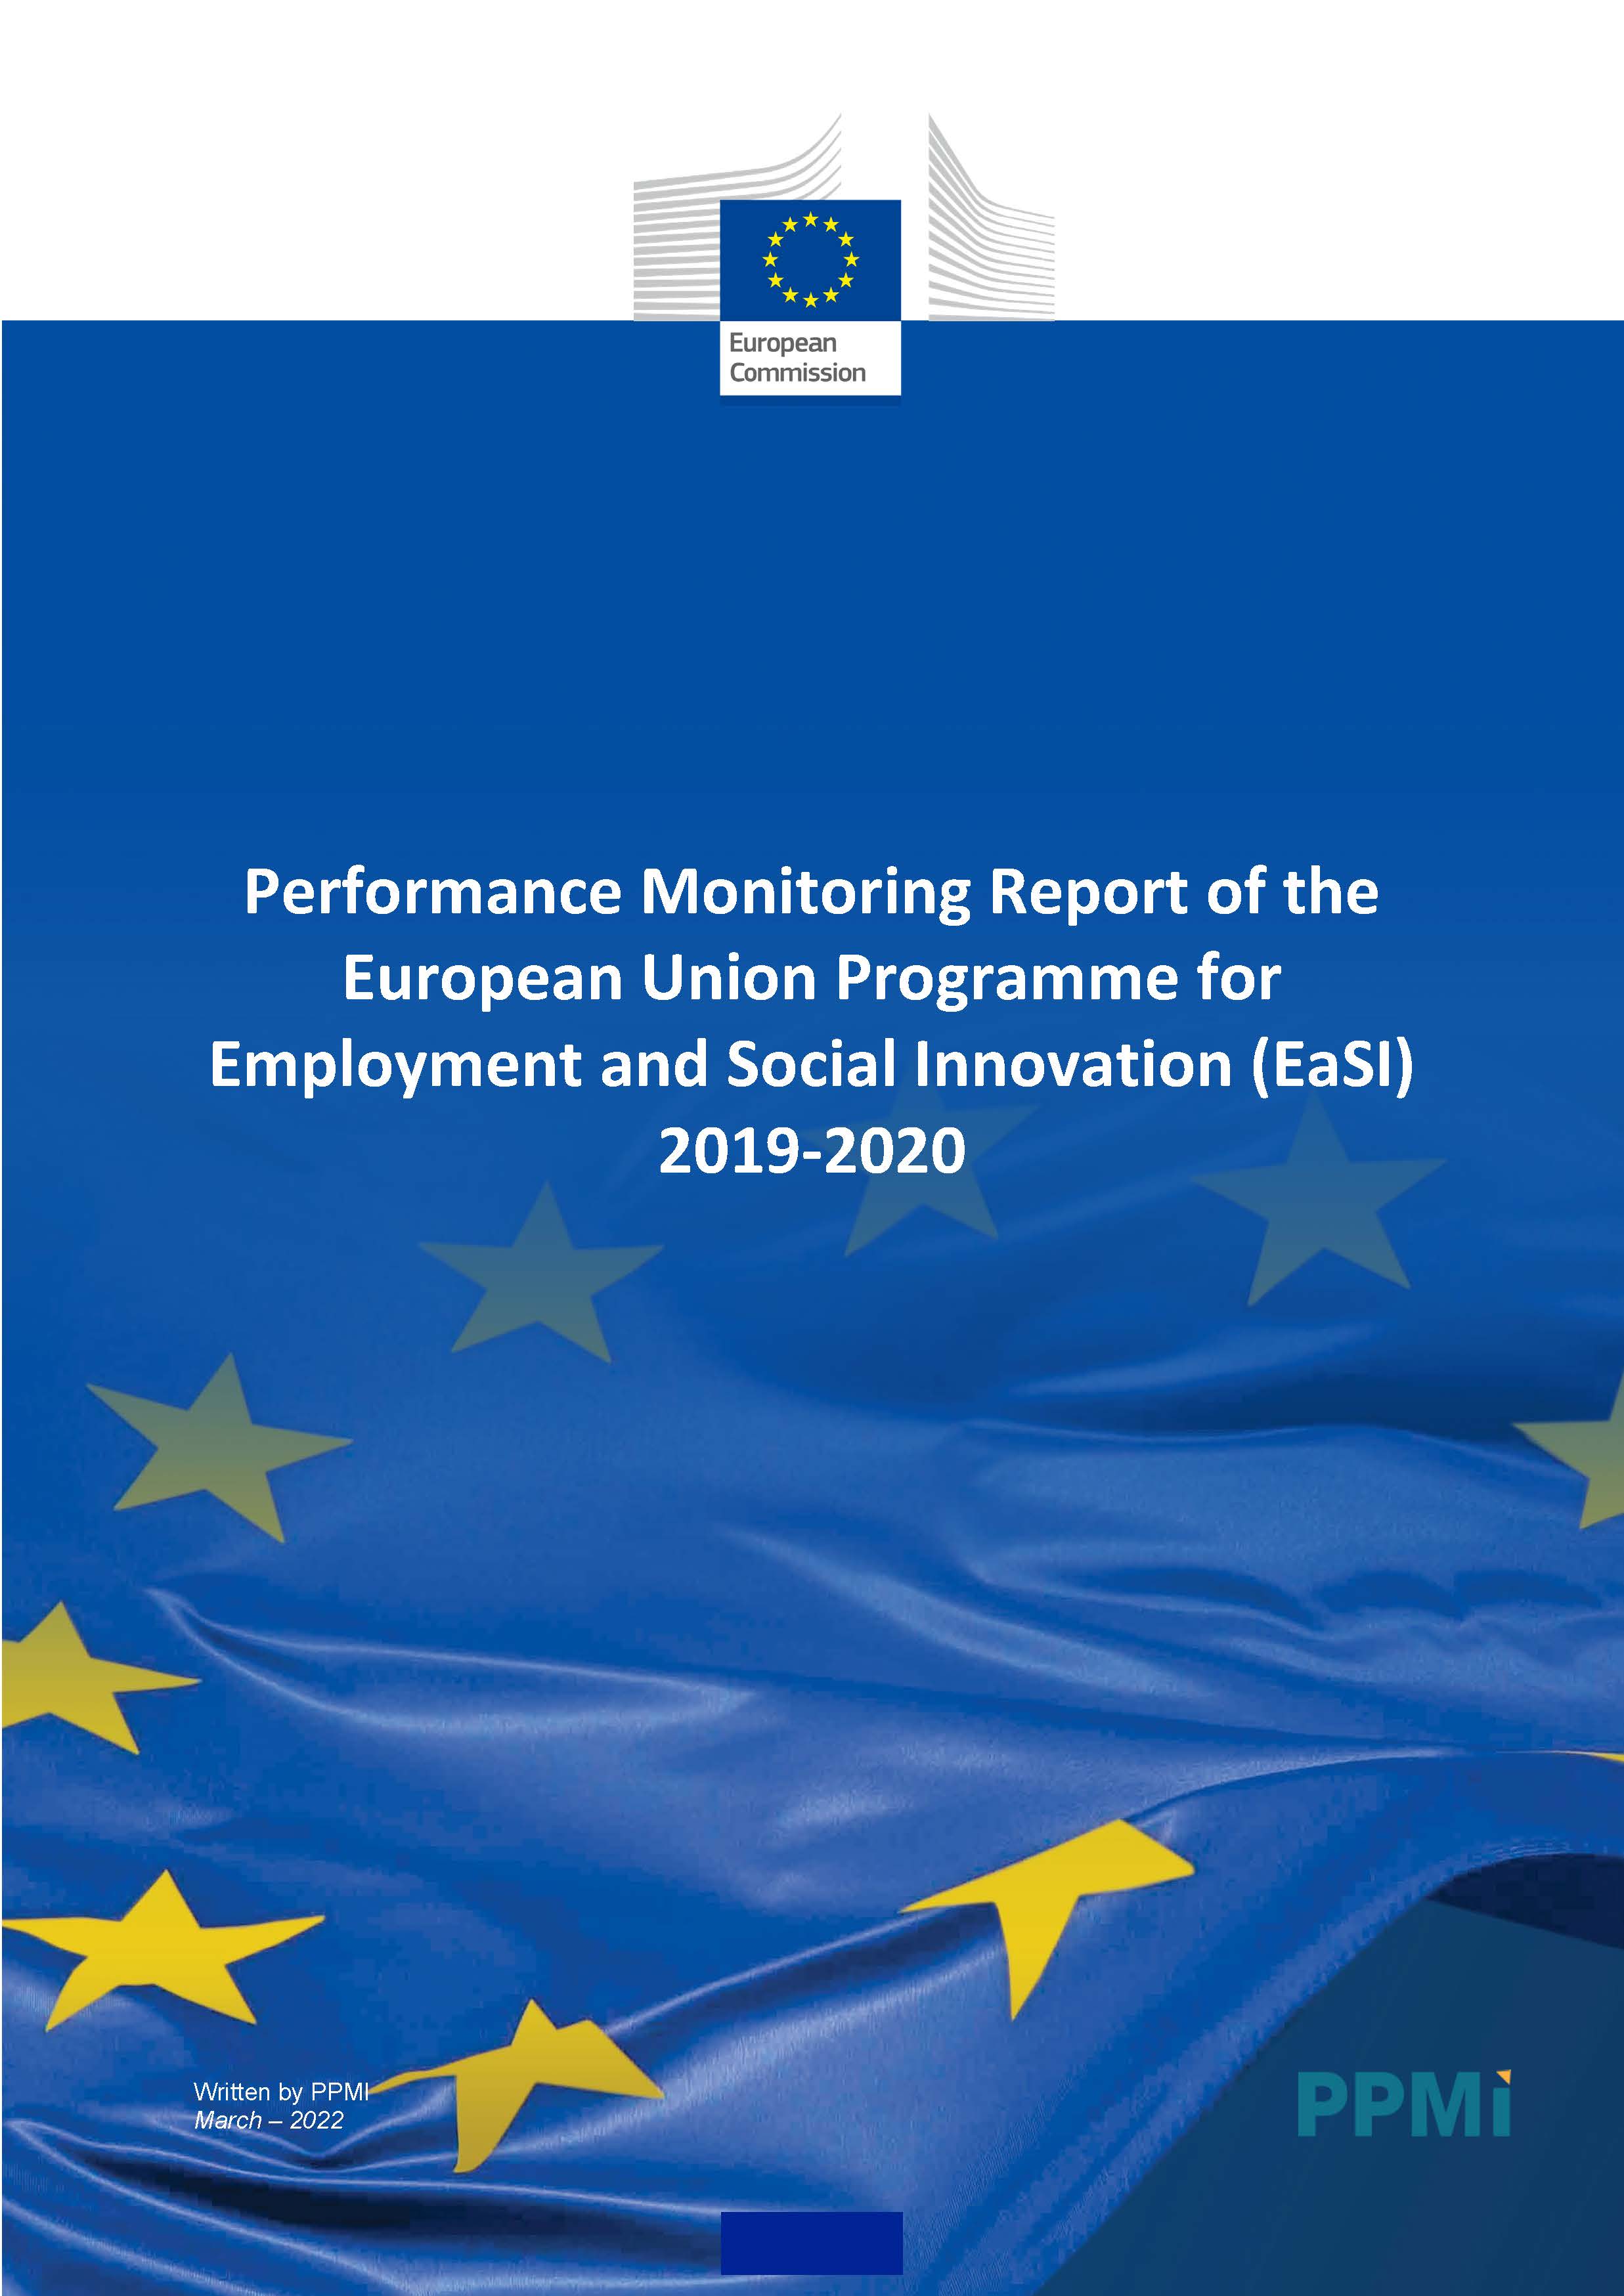 Performance monitoring report of the European Union Programme for Employment and Social Innovation (EaSI) 2019-2020